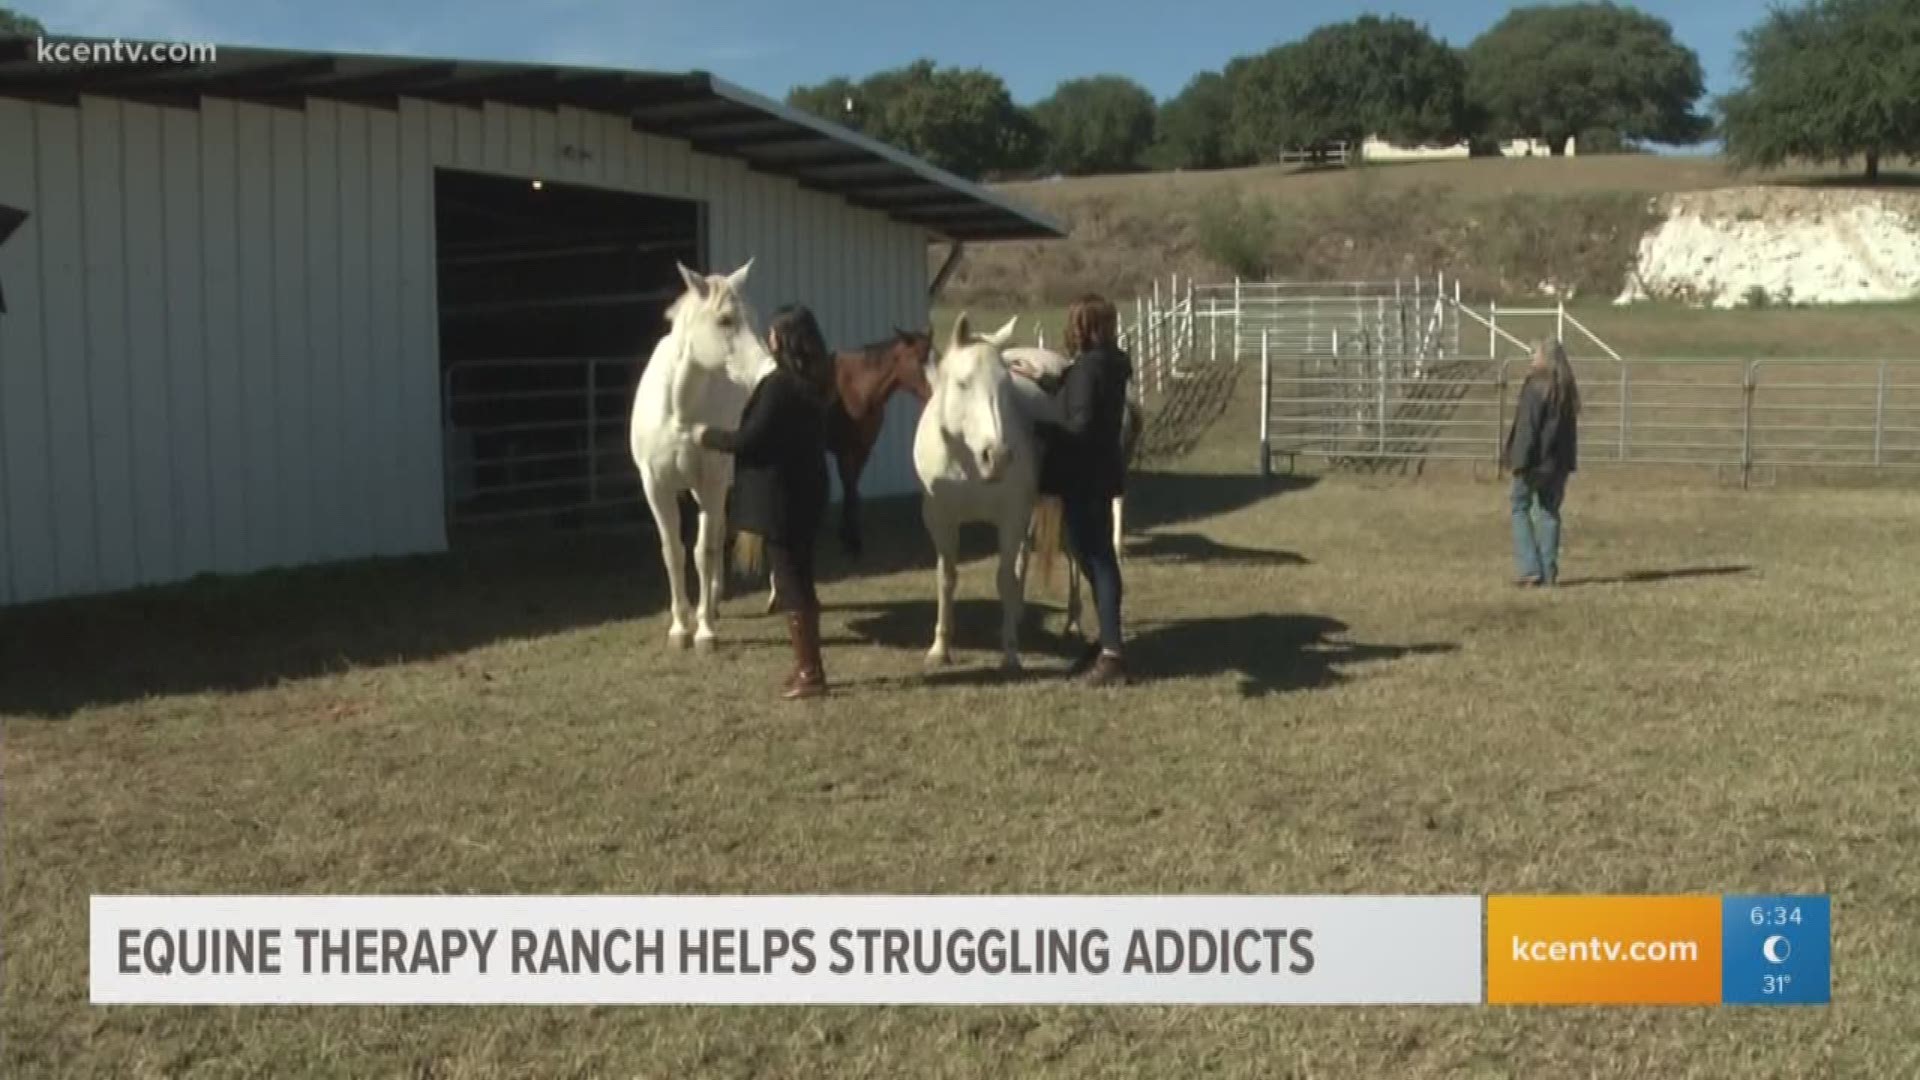 A California woman moved to central Texas to open up a ranch to provide Equine therapy for people struggling with addiction.